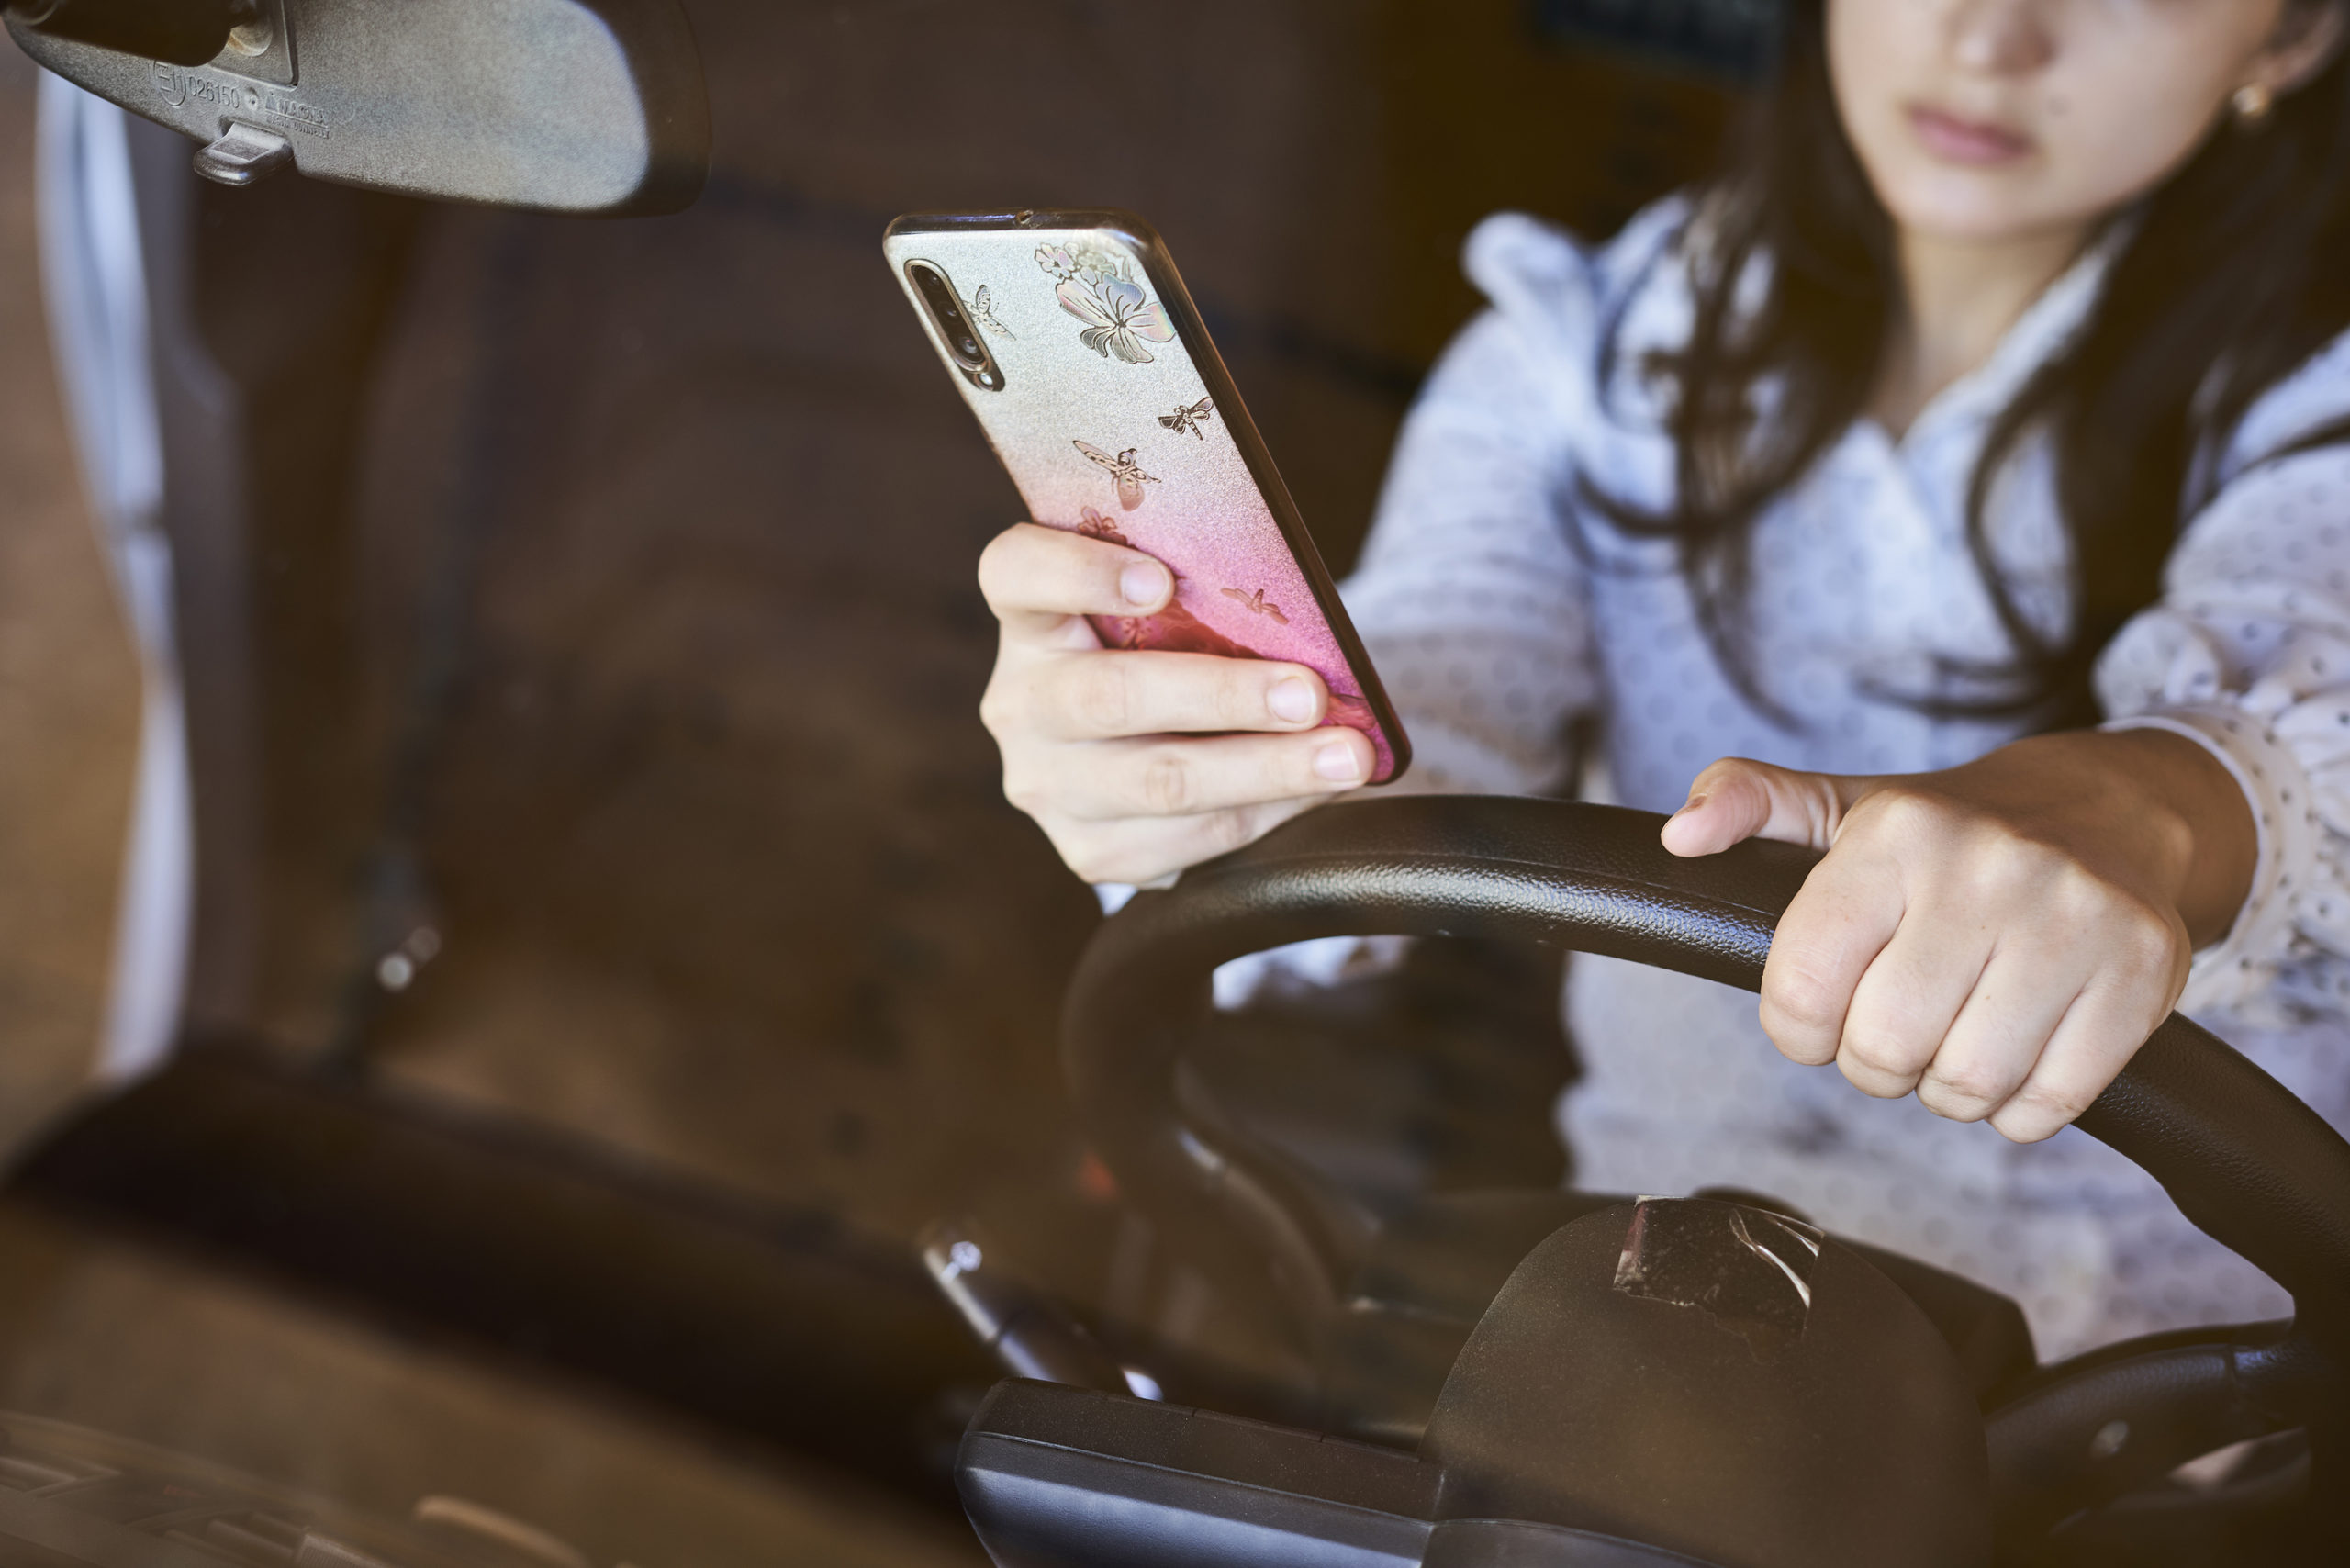 social media distracted driving lawsuit claim attorney lawyer injury